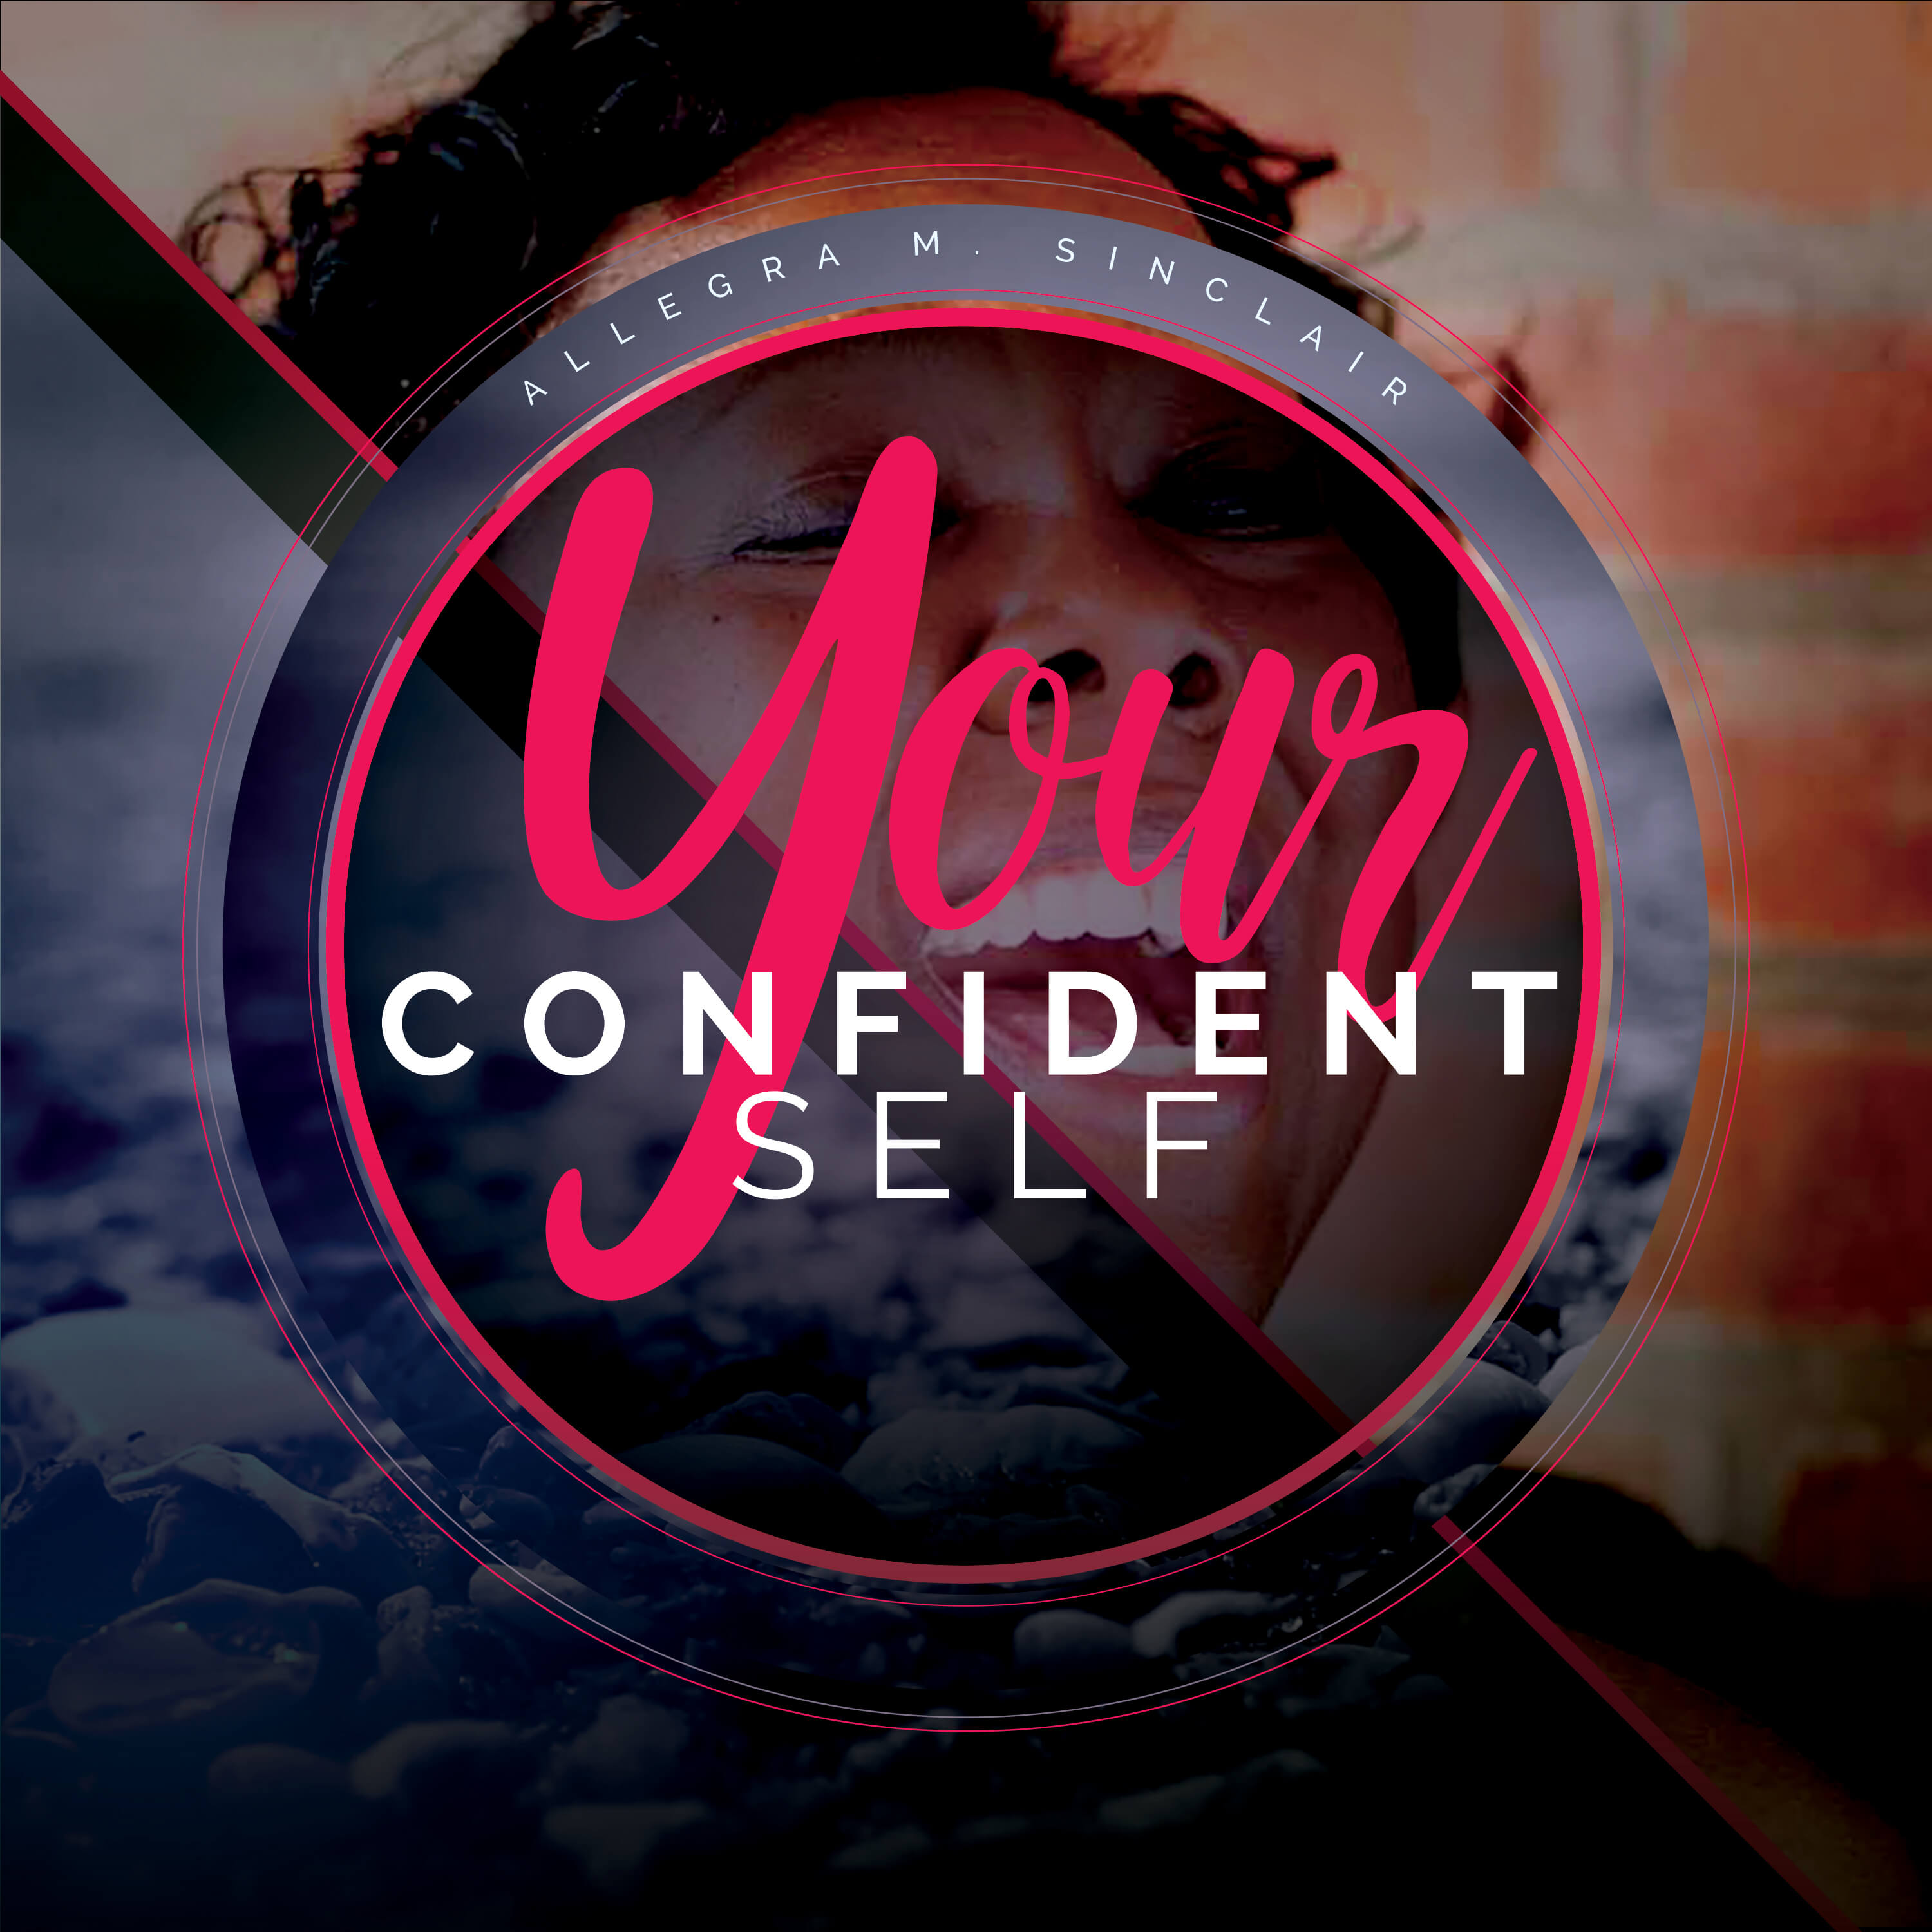 Artwork for Your Confident Self